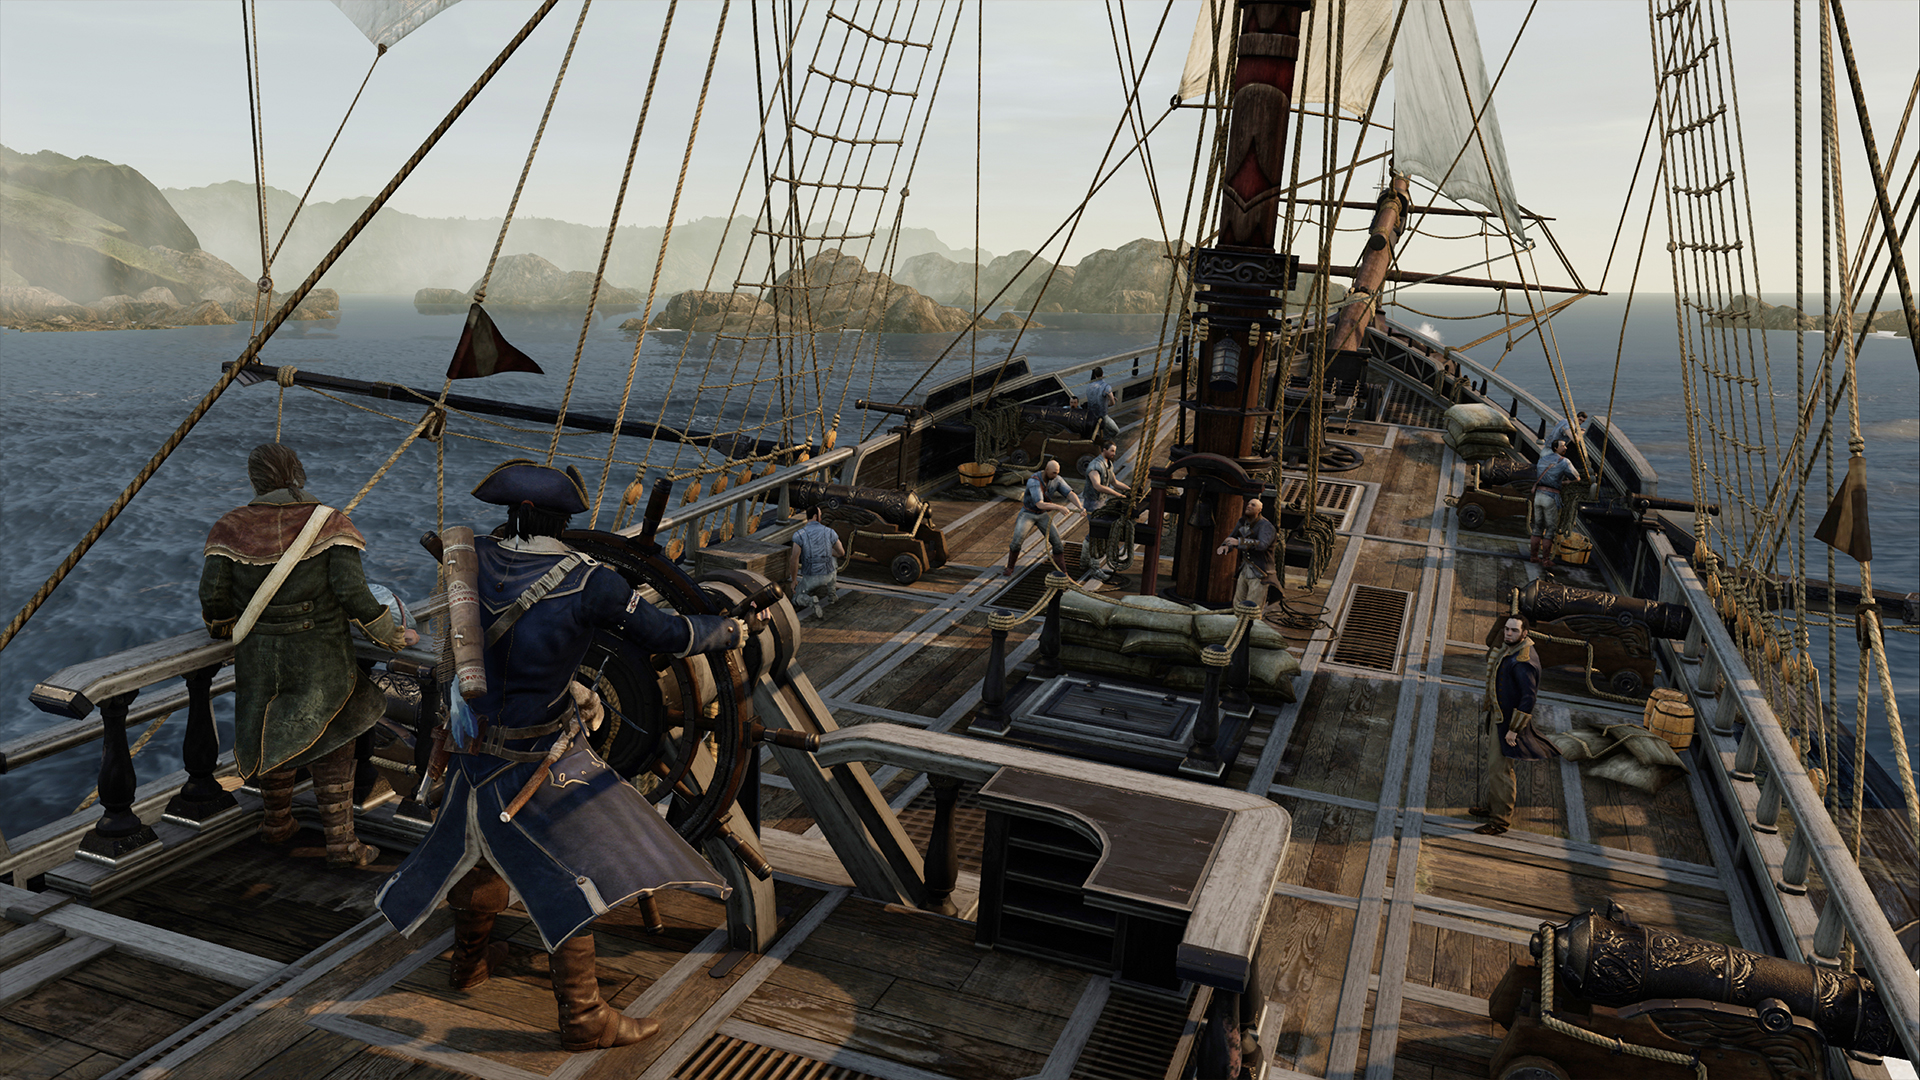 Screenshot for the game Assassin's Creed III Remastered (v.1.03 + DLC) (2019) download torrent RePack